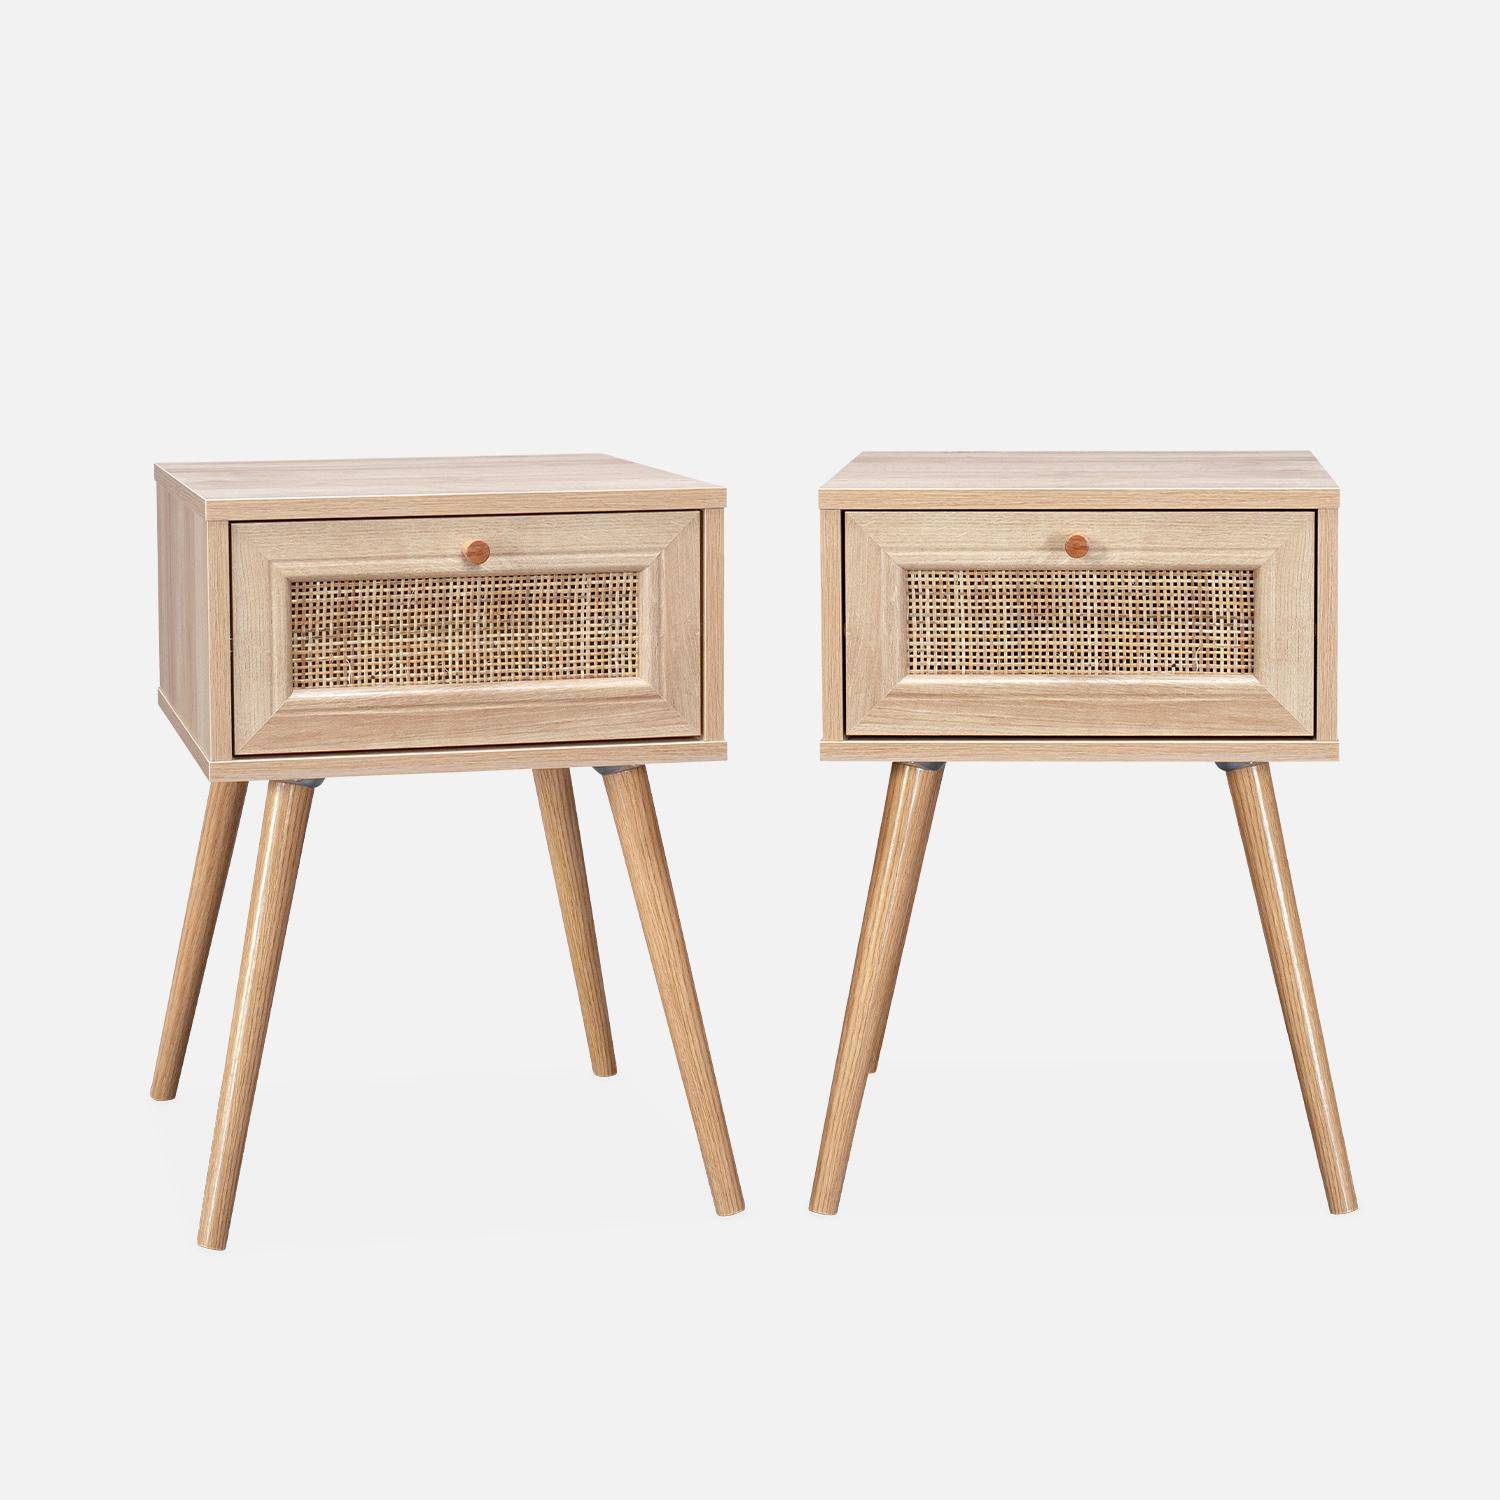 Pair of woven rattan bedside tables with drawer, 39x39x55.4cm - Boheme - Natural Wood colour Photo3